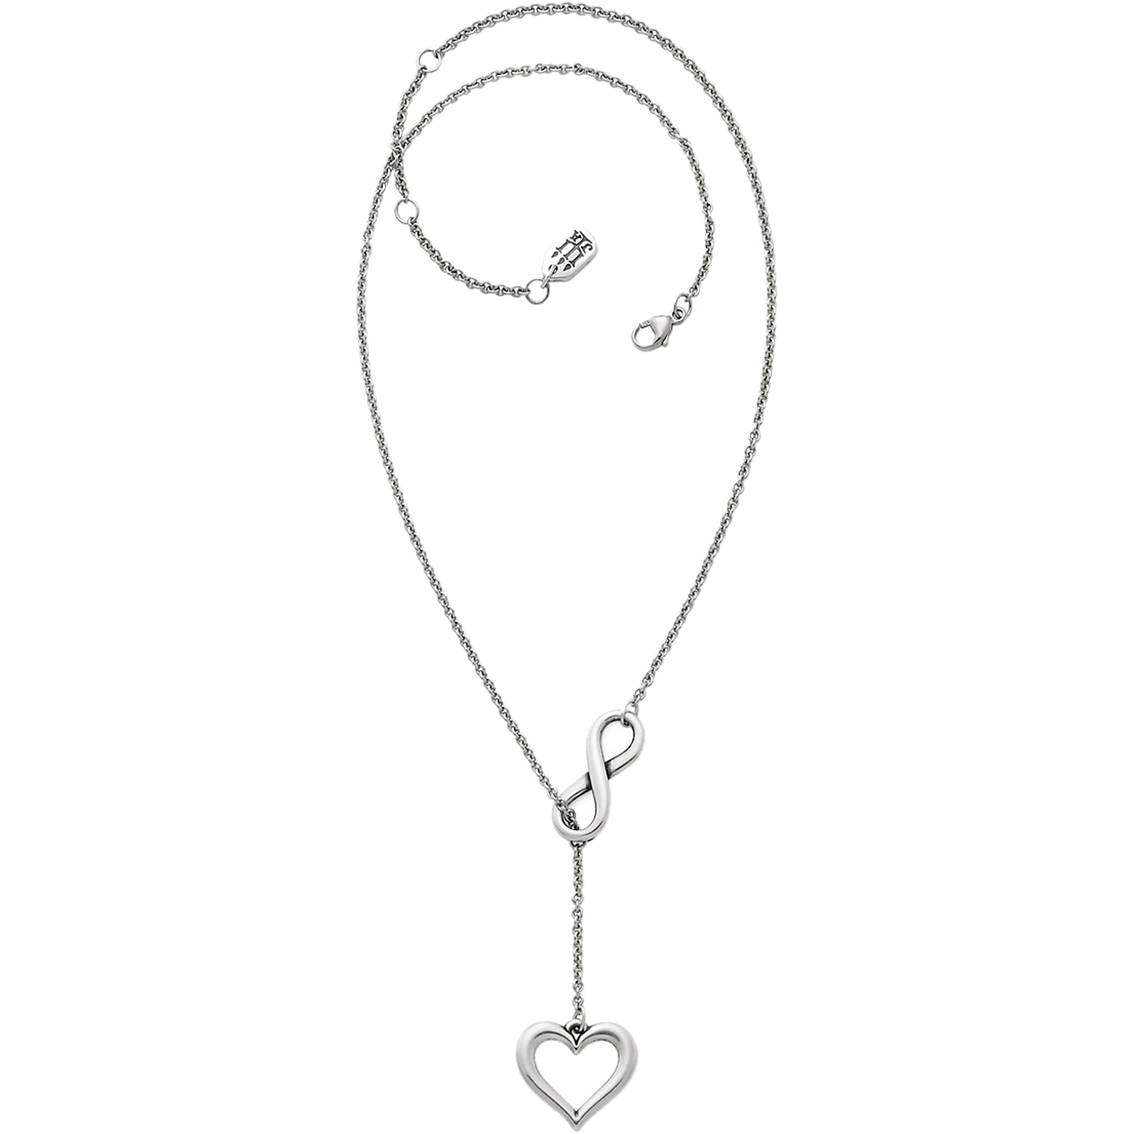 James Avery Sterling Silver Infinite Love Necklace - Image 2 of 2